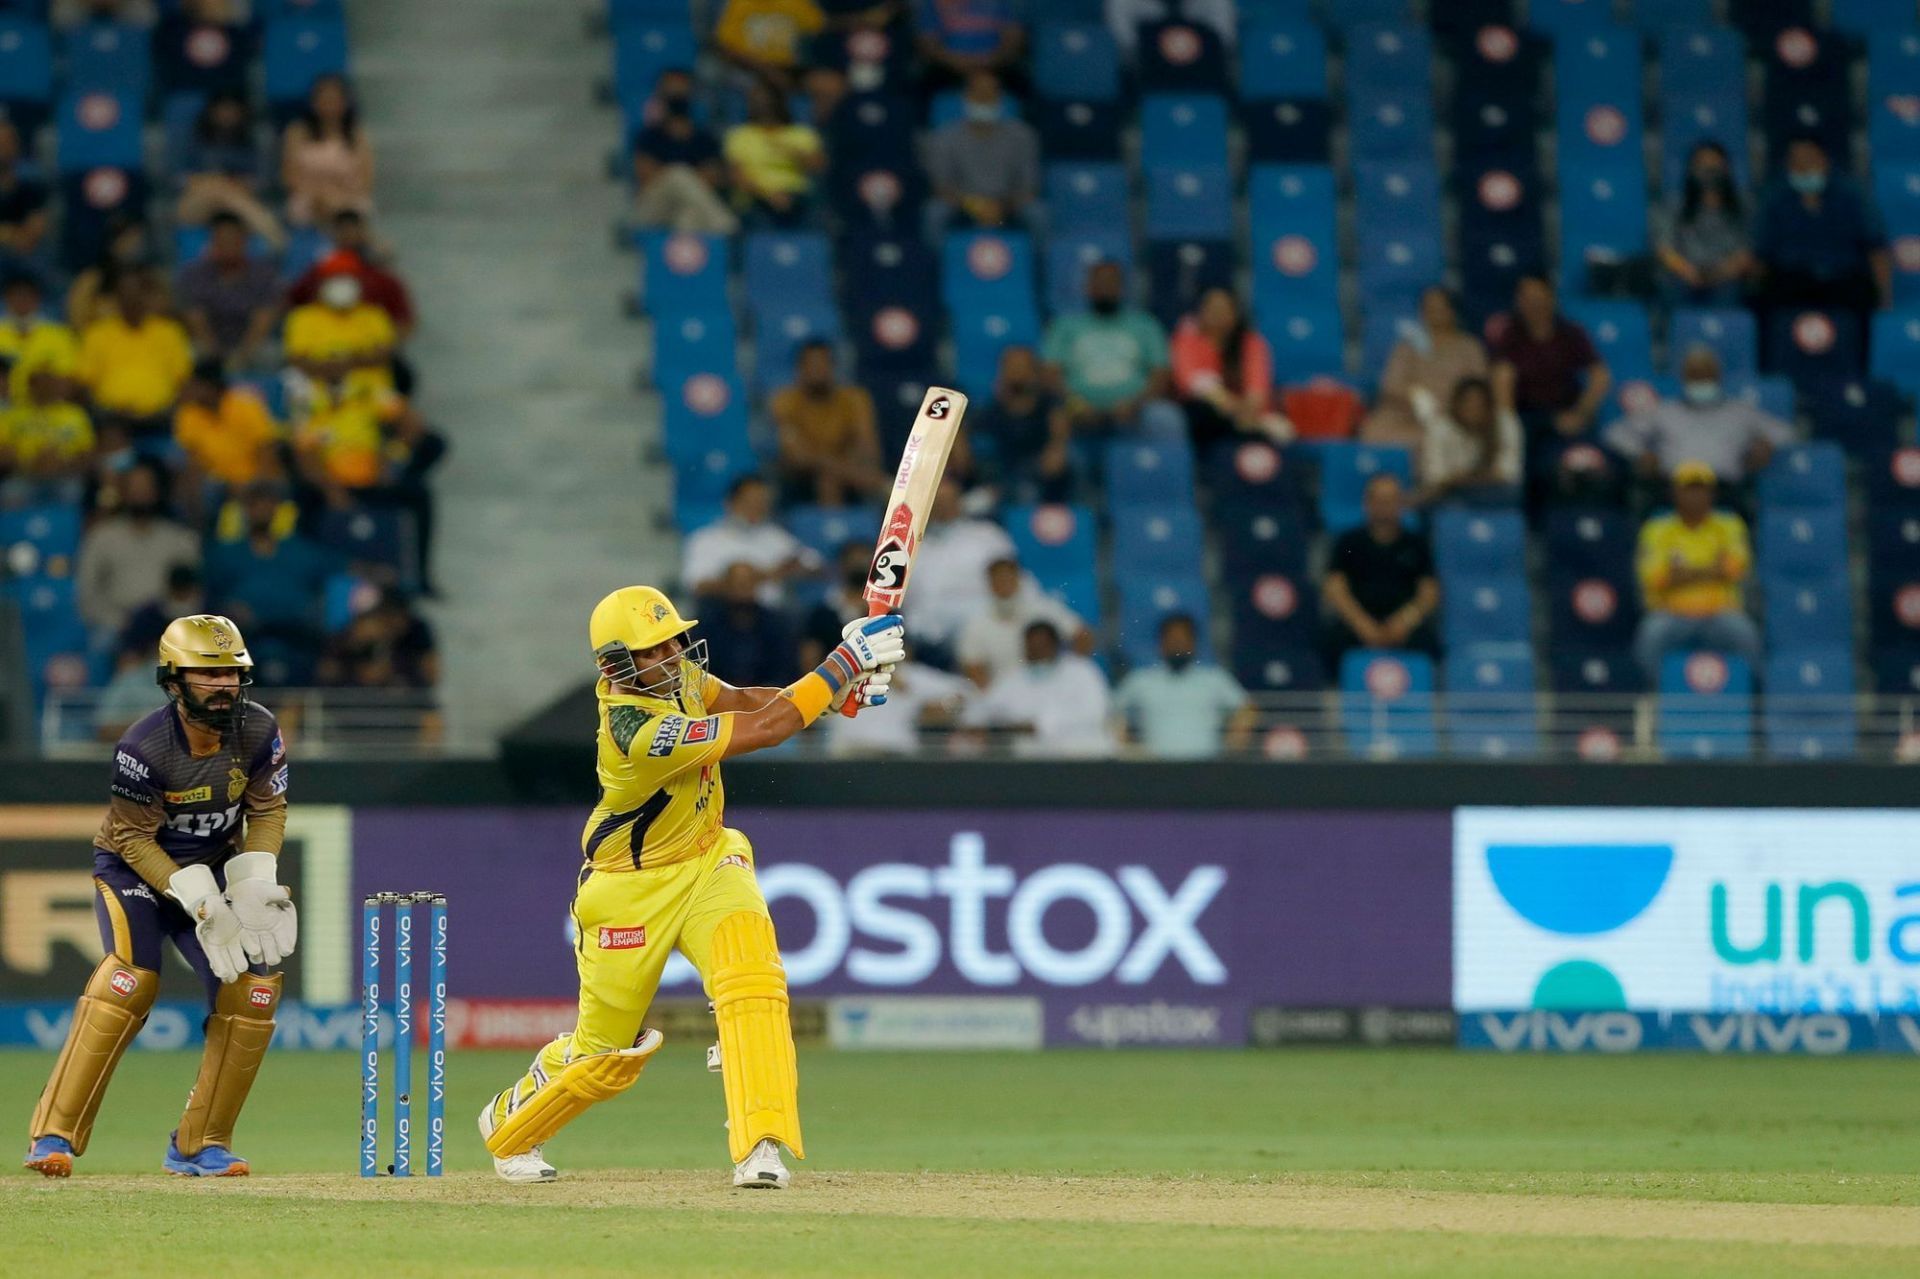 Robin Uthappa was at his belligerent best for CSK [P/C: iplt20.com]